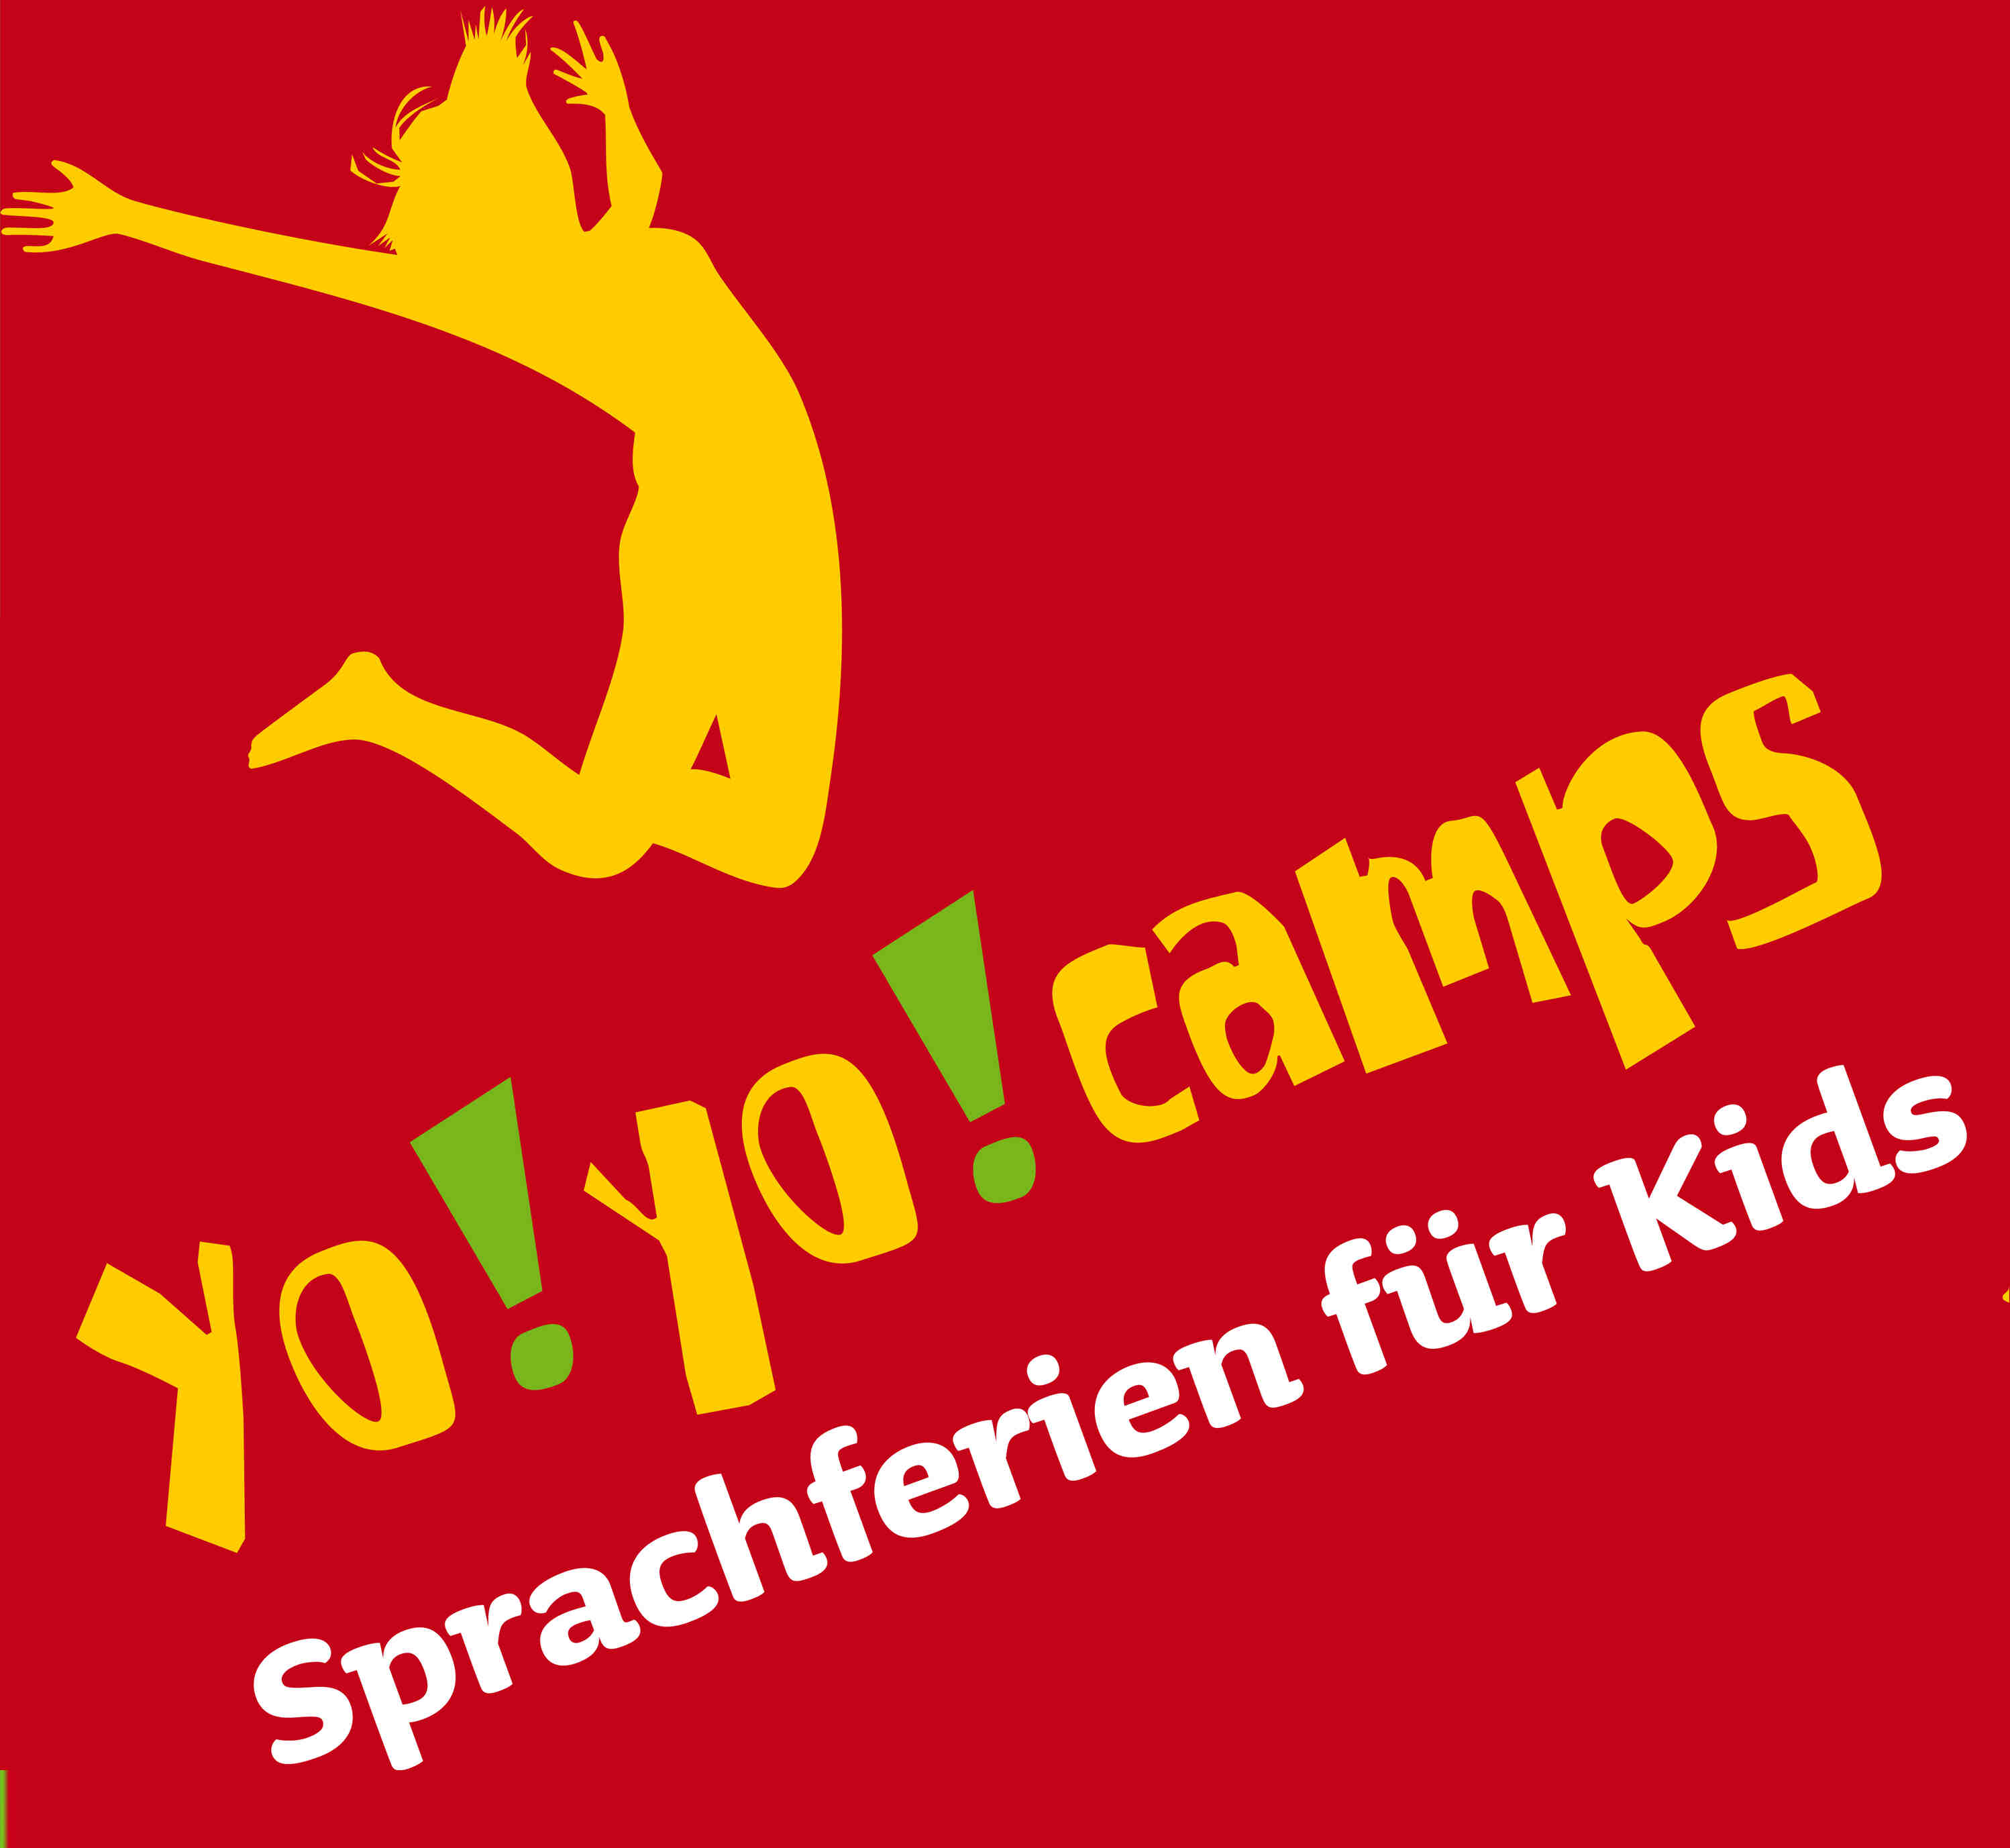 Come work with German children for the summer!